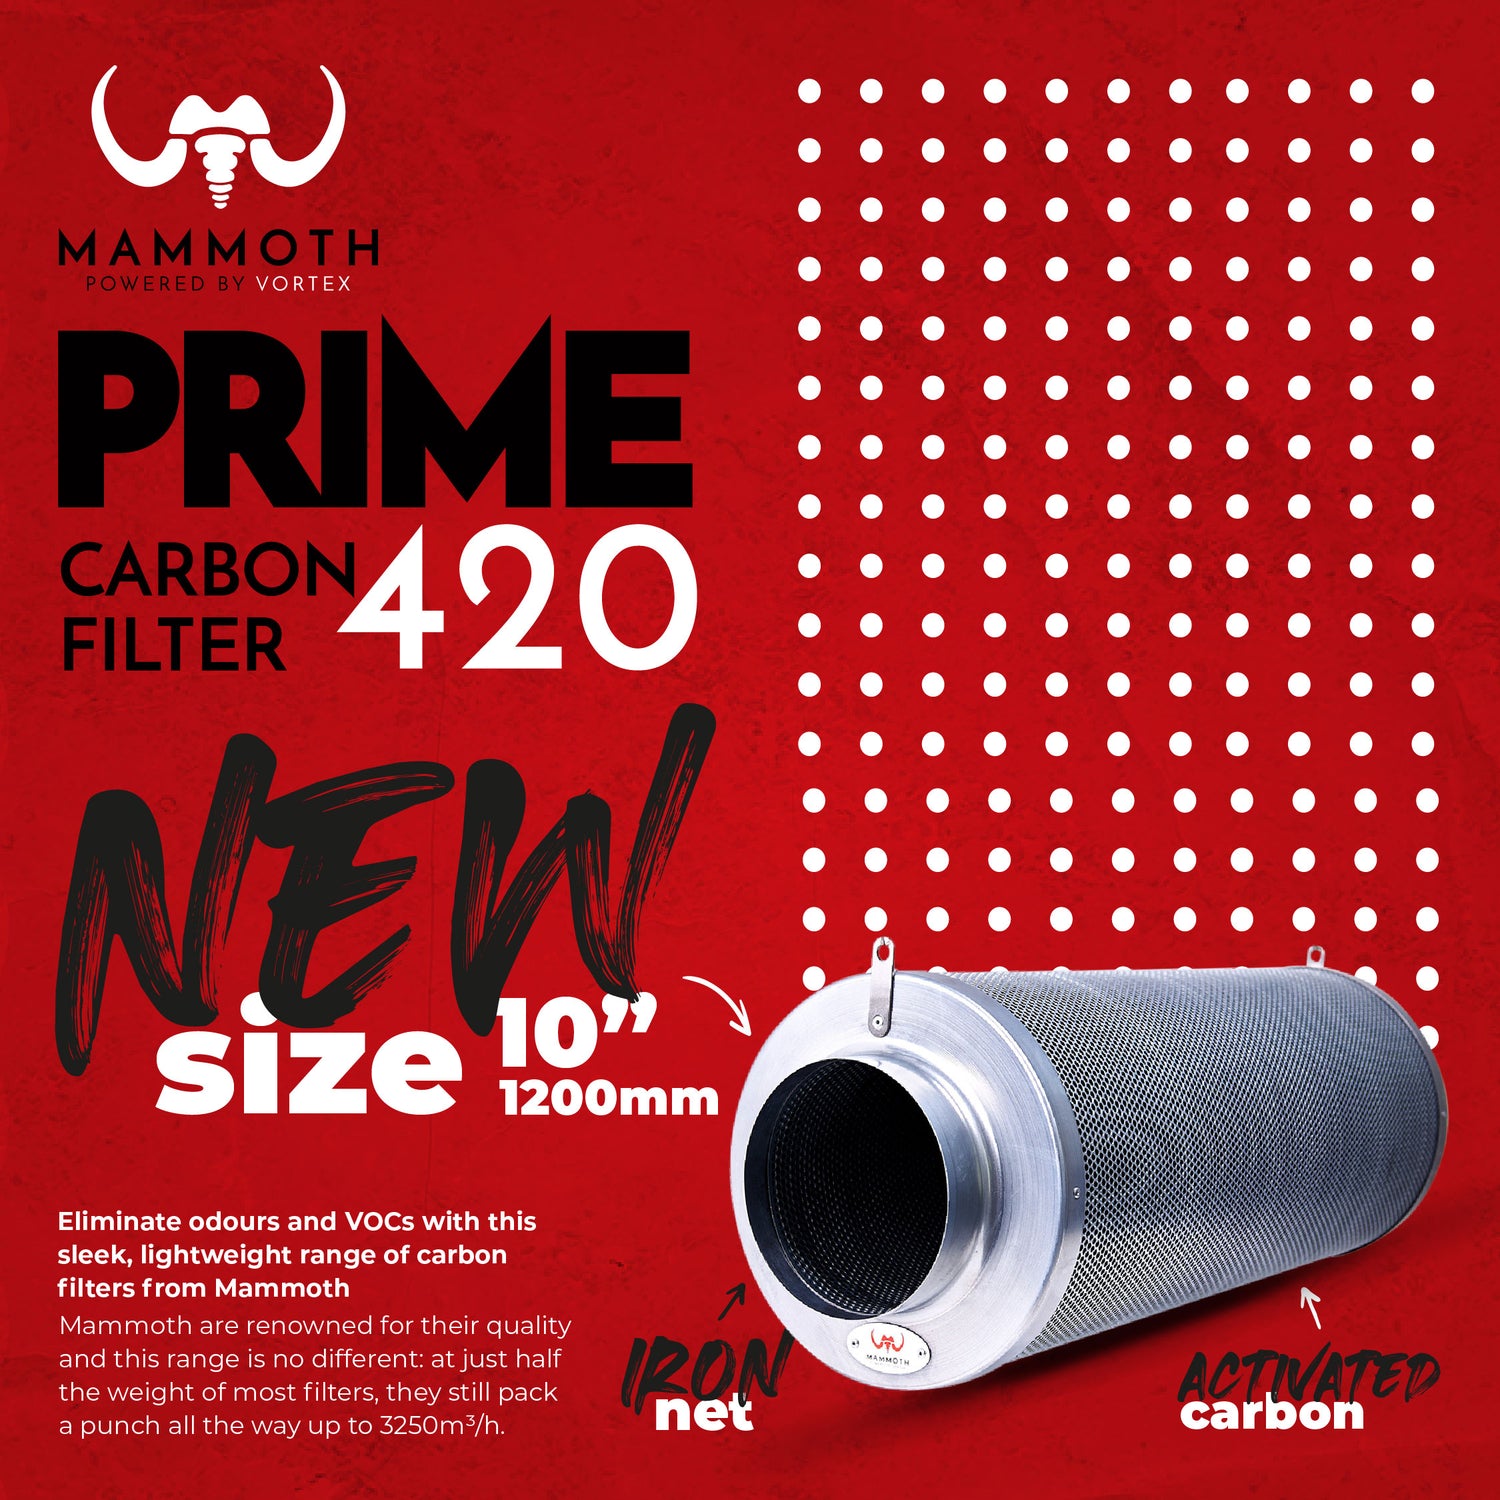 New Mammoth 10" 1200mm Prime Carbon Filter